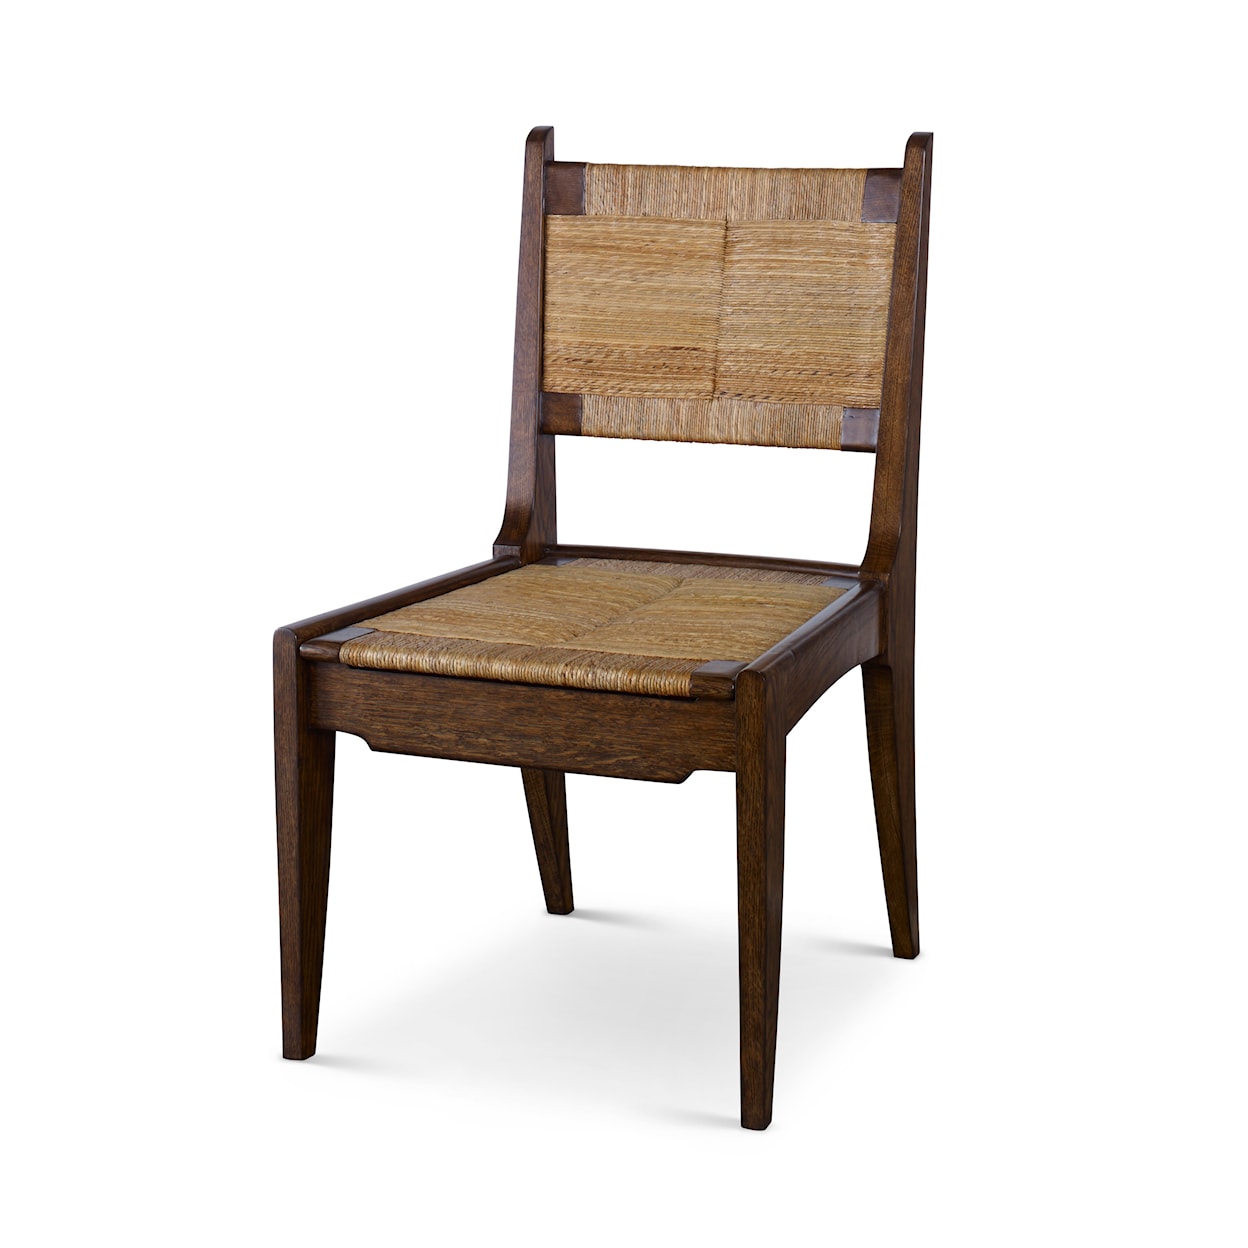 Century Thomas O'Brien - Upholstery Dining Chair